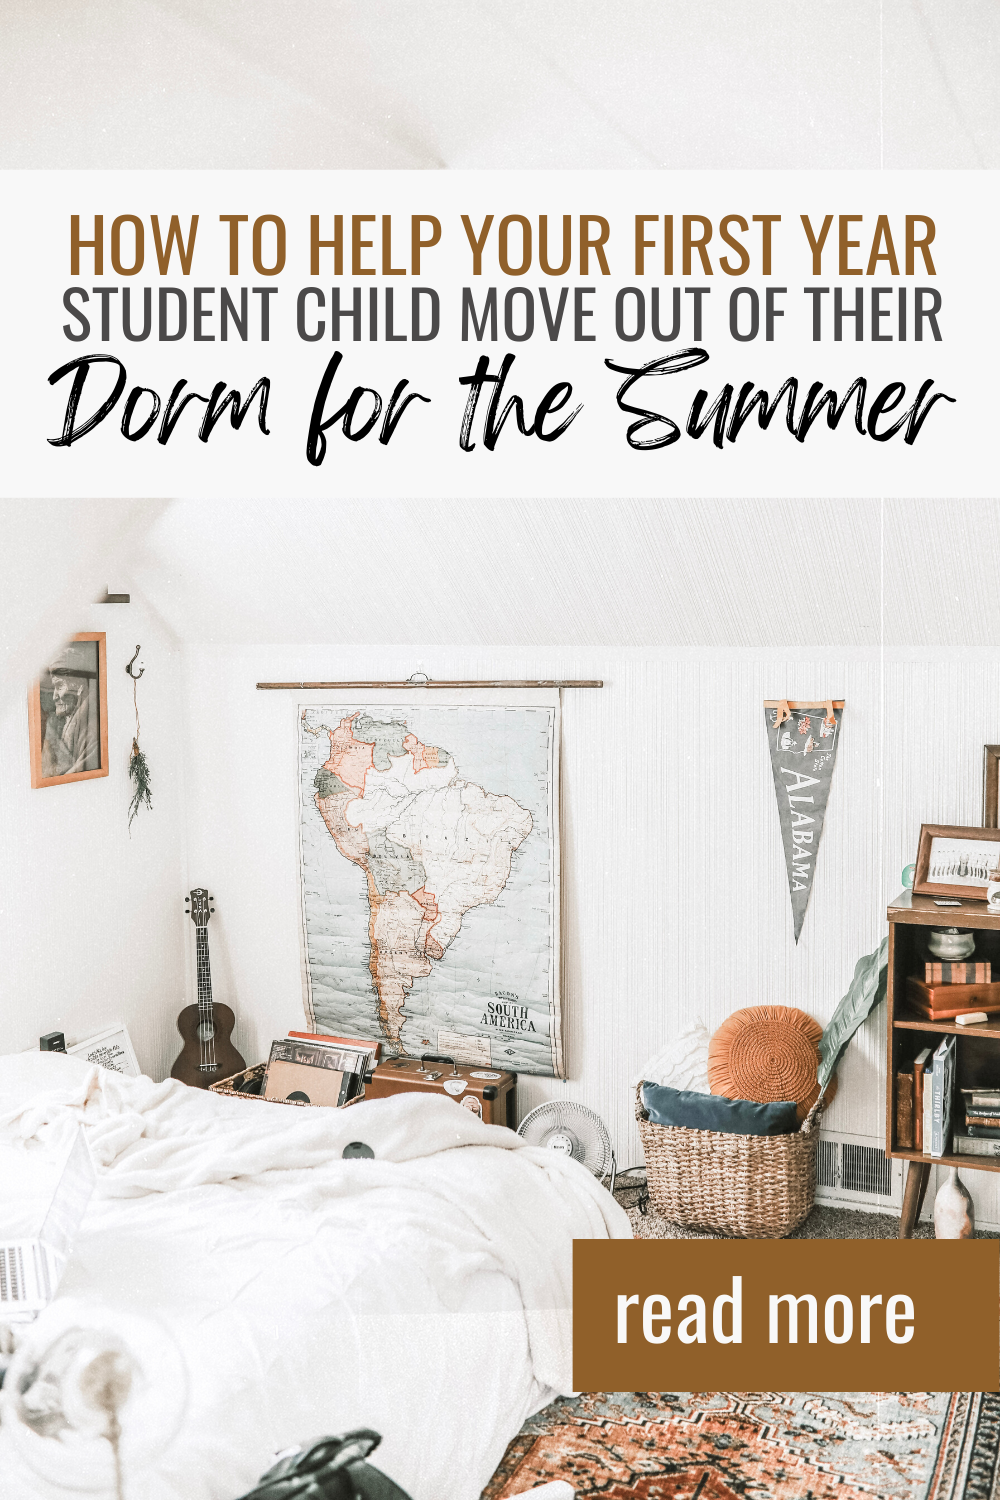 A very trendy bedroom/dorm room for a college student. This article covers how to help your first year college student child move out of their dorm for the summer.